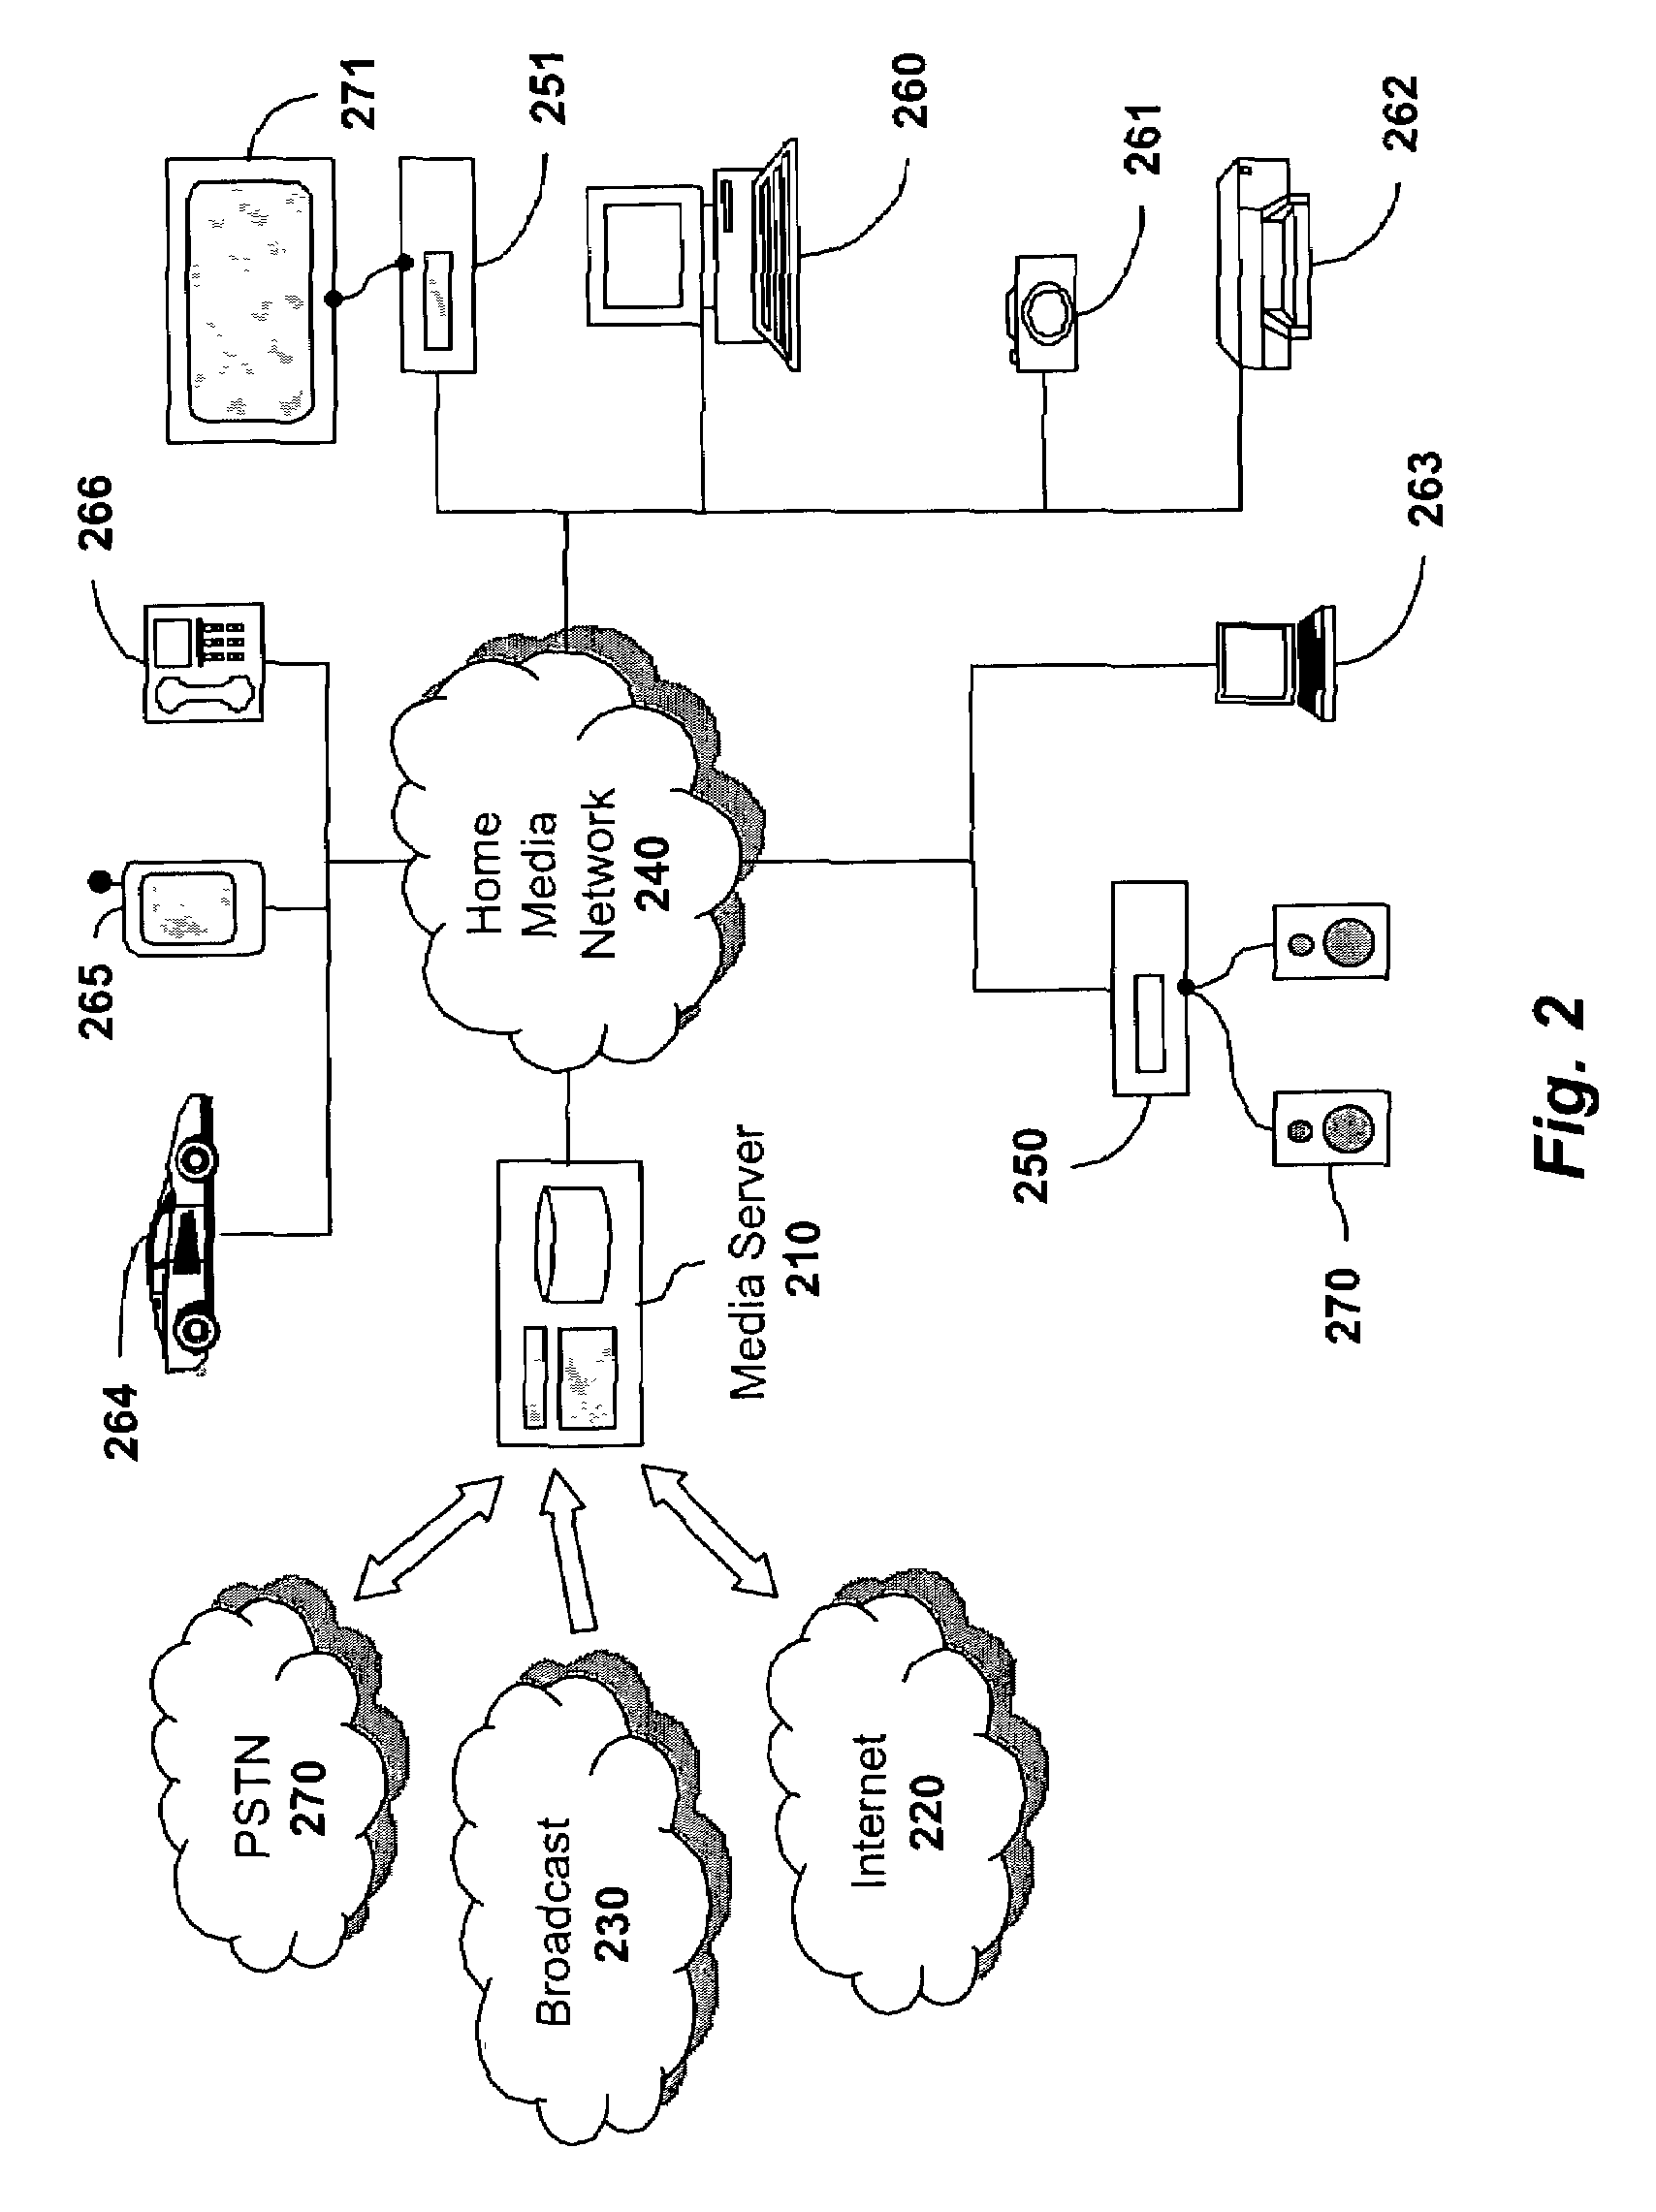 Apparatus and method for powering a network device